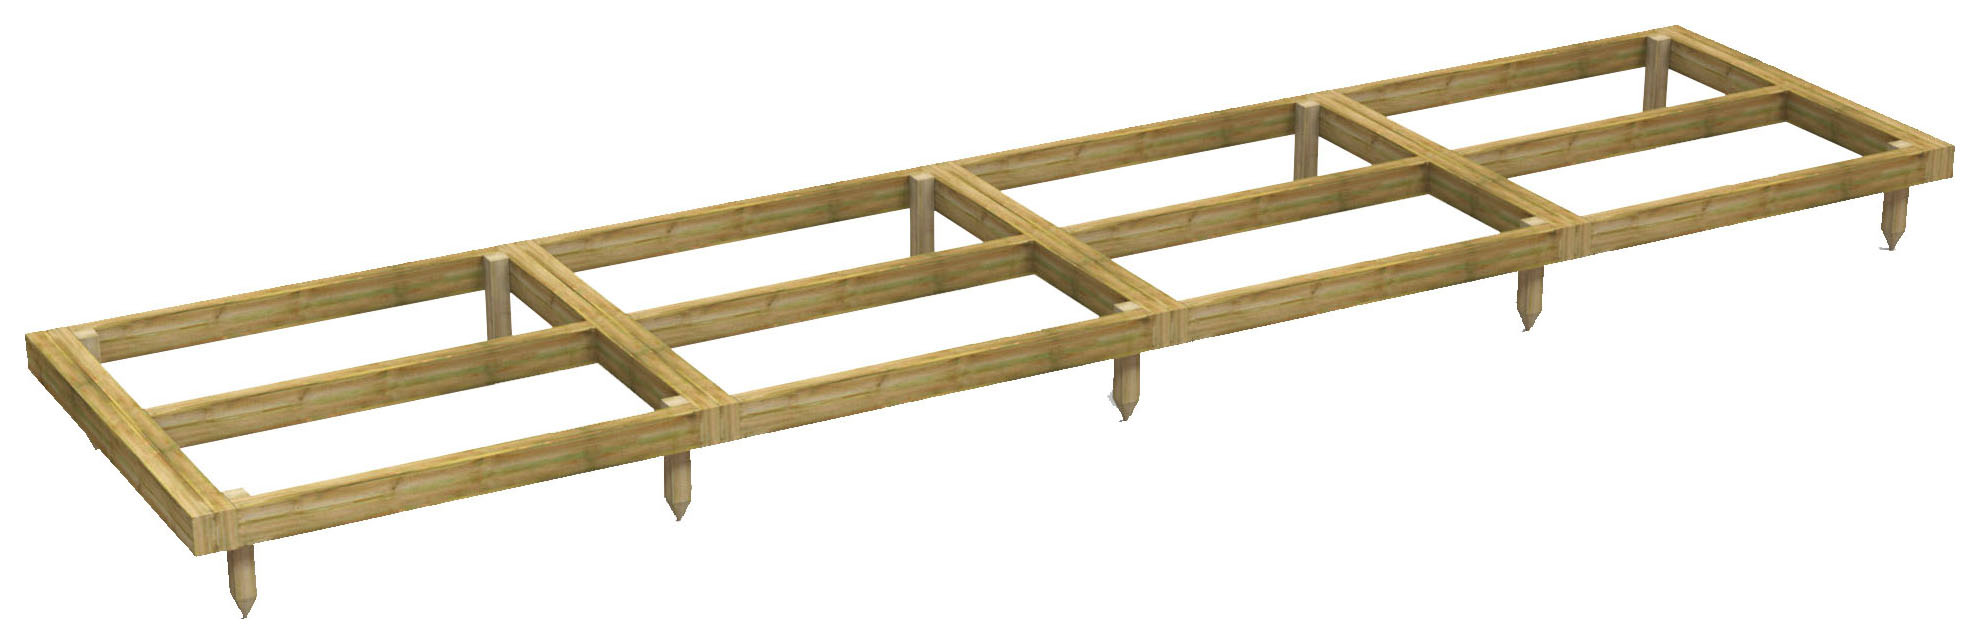 Image of Power Sheds 16 x 4ft Pressure Treated Garden Building Base Kit